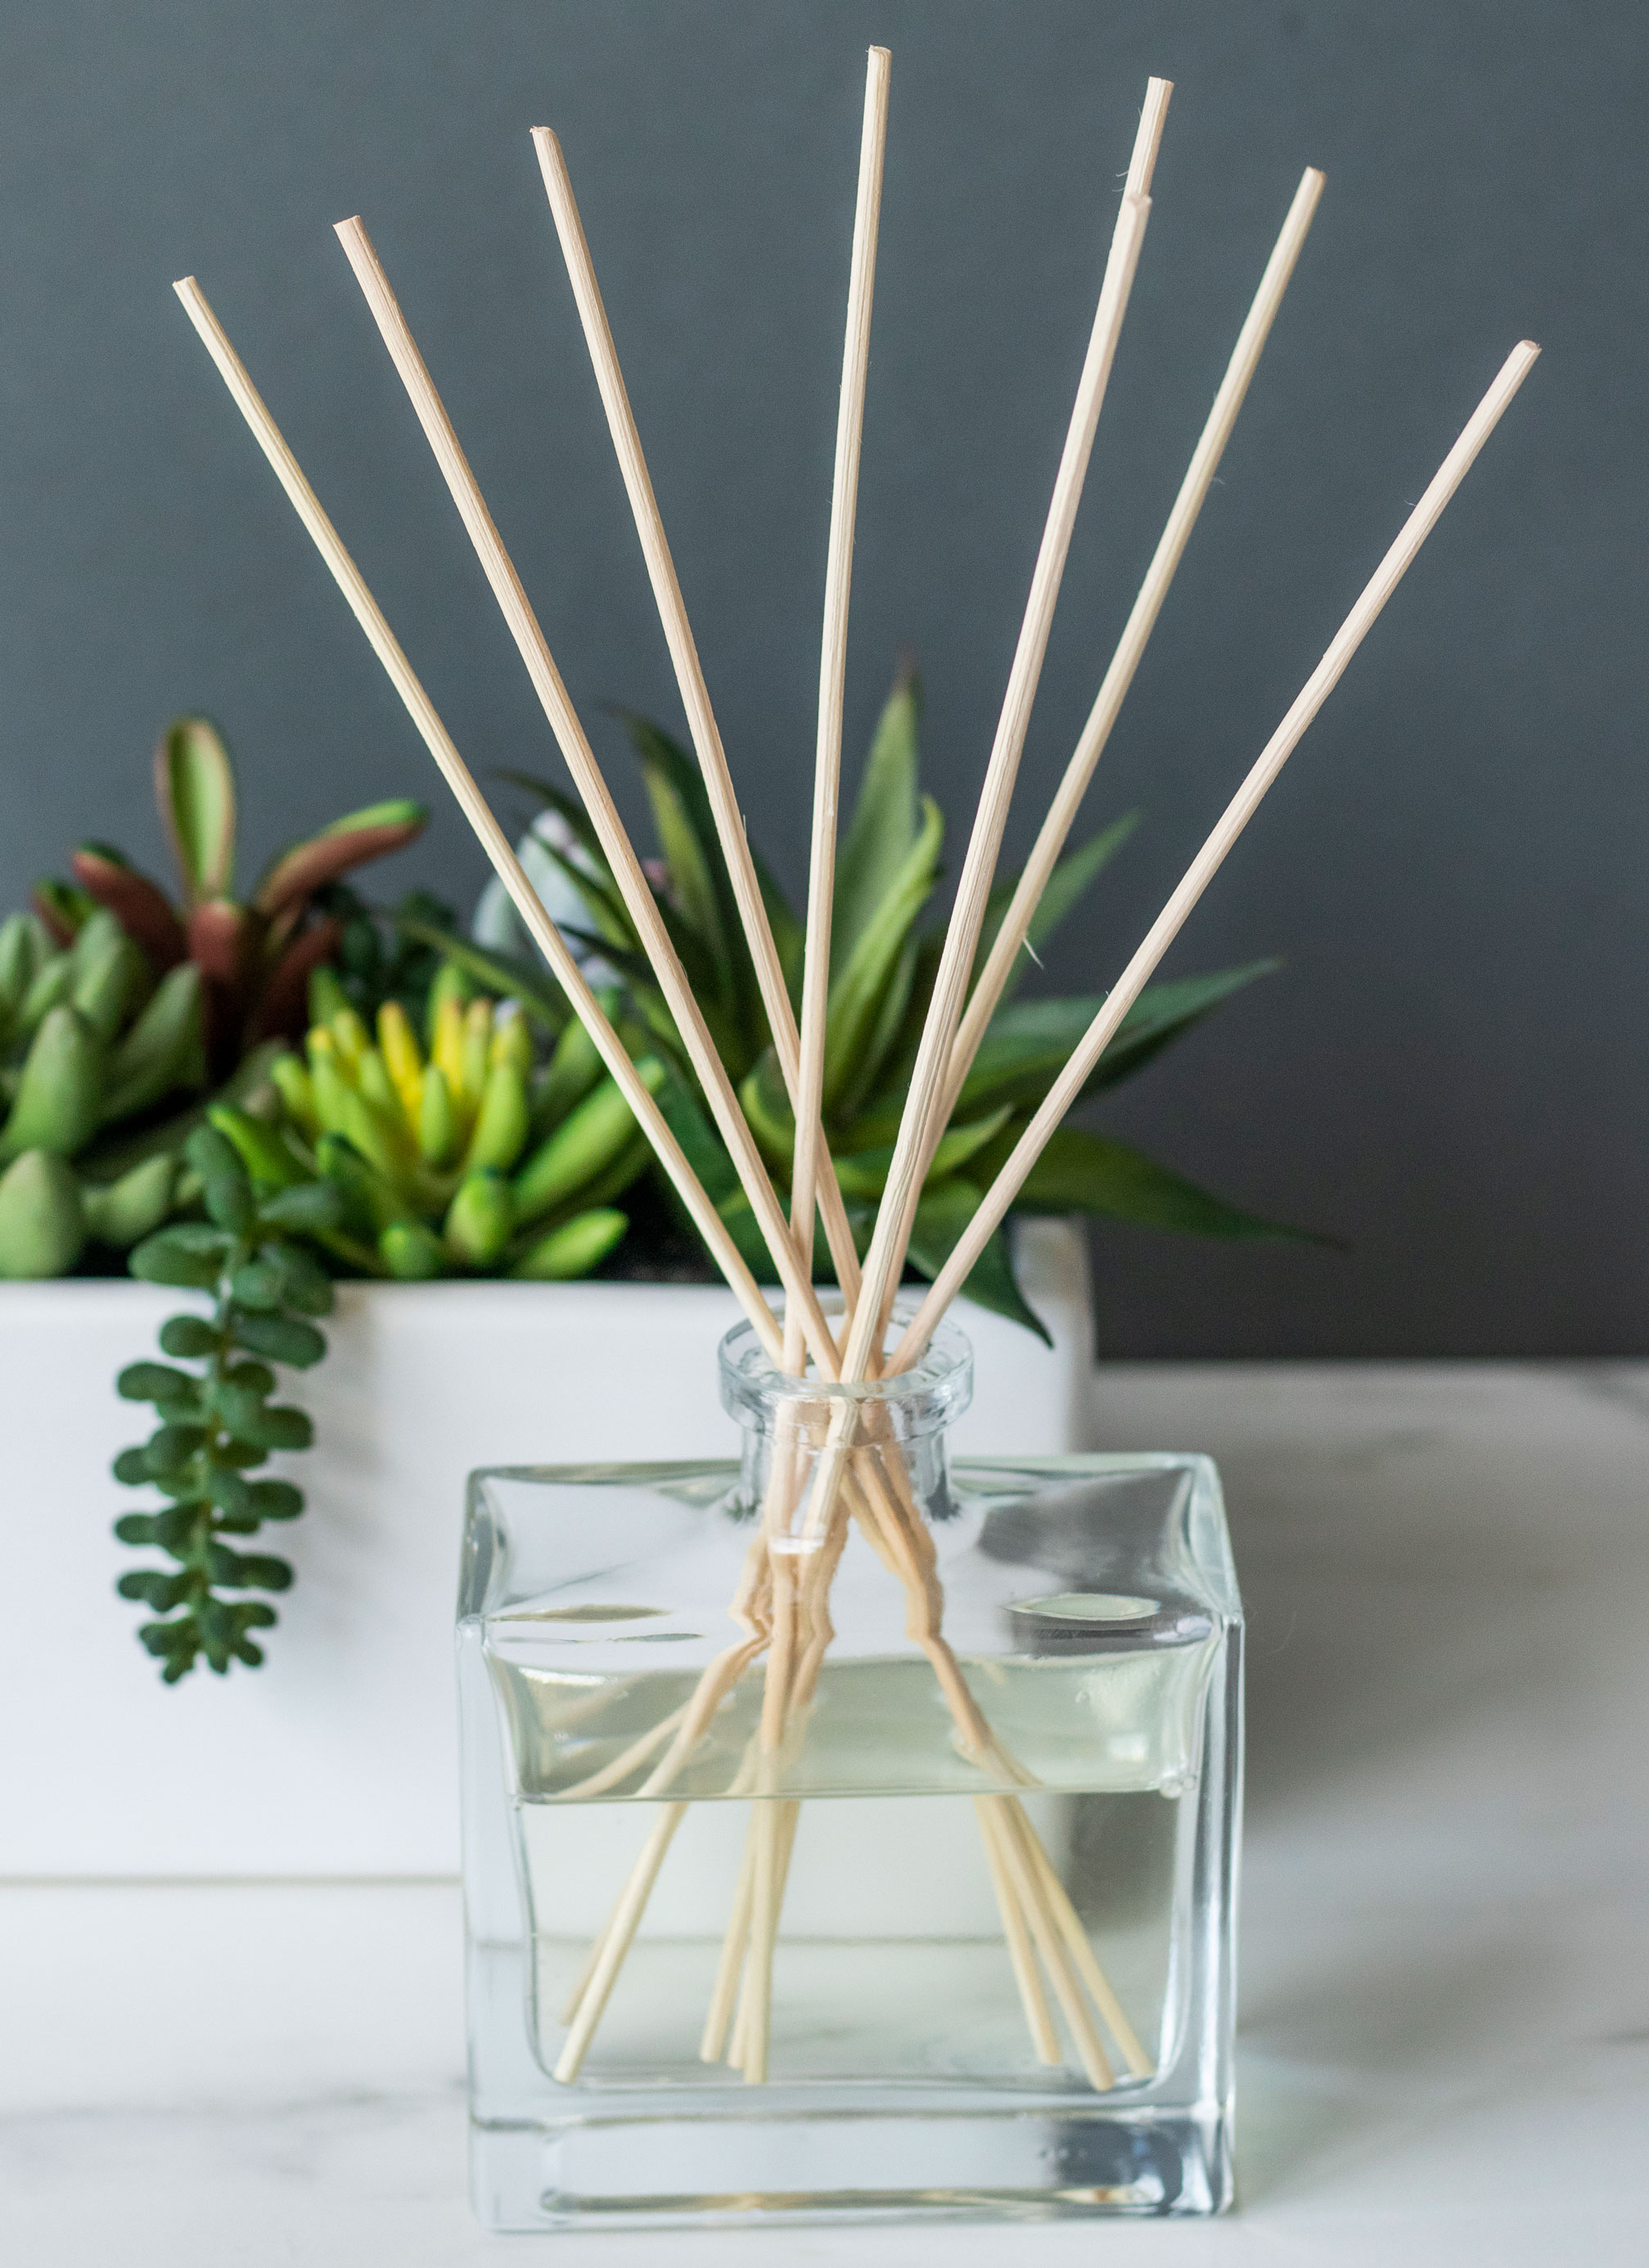 Finished reed diffuser